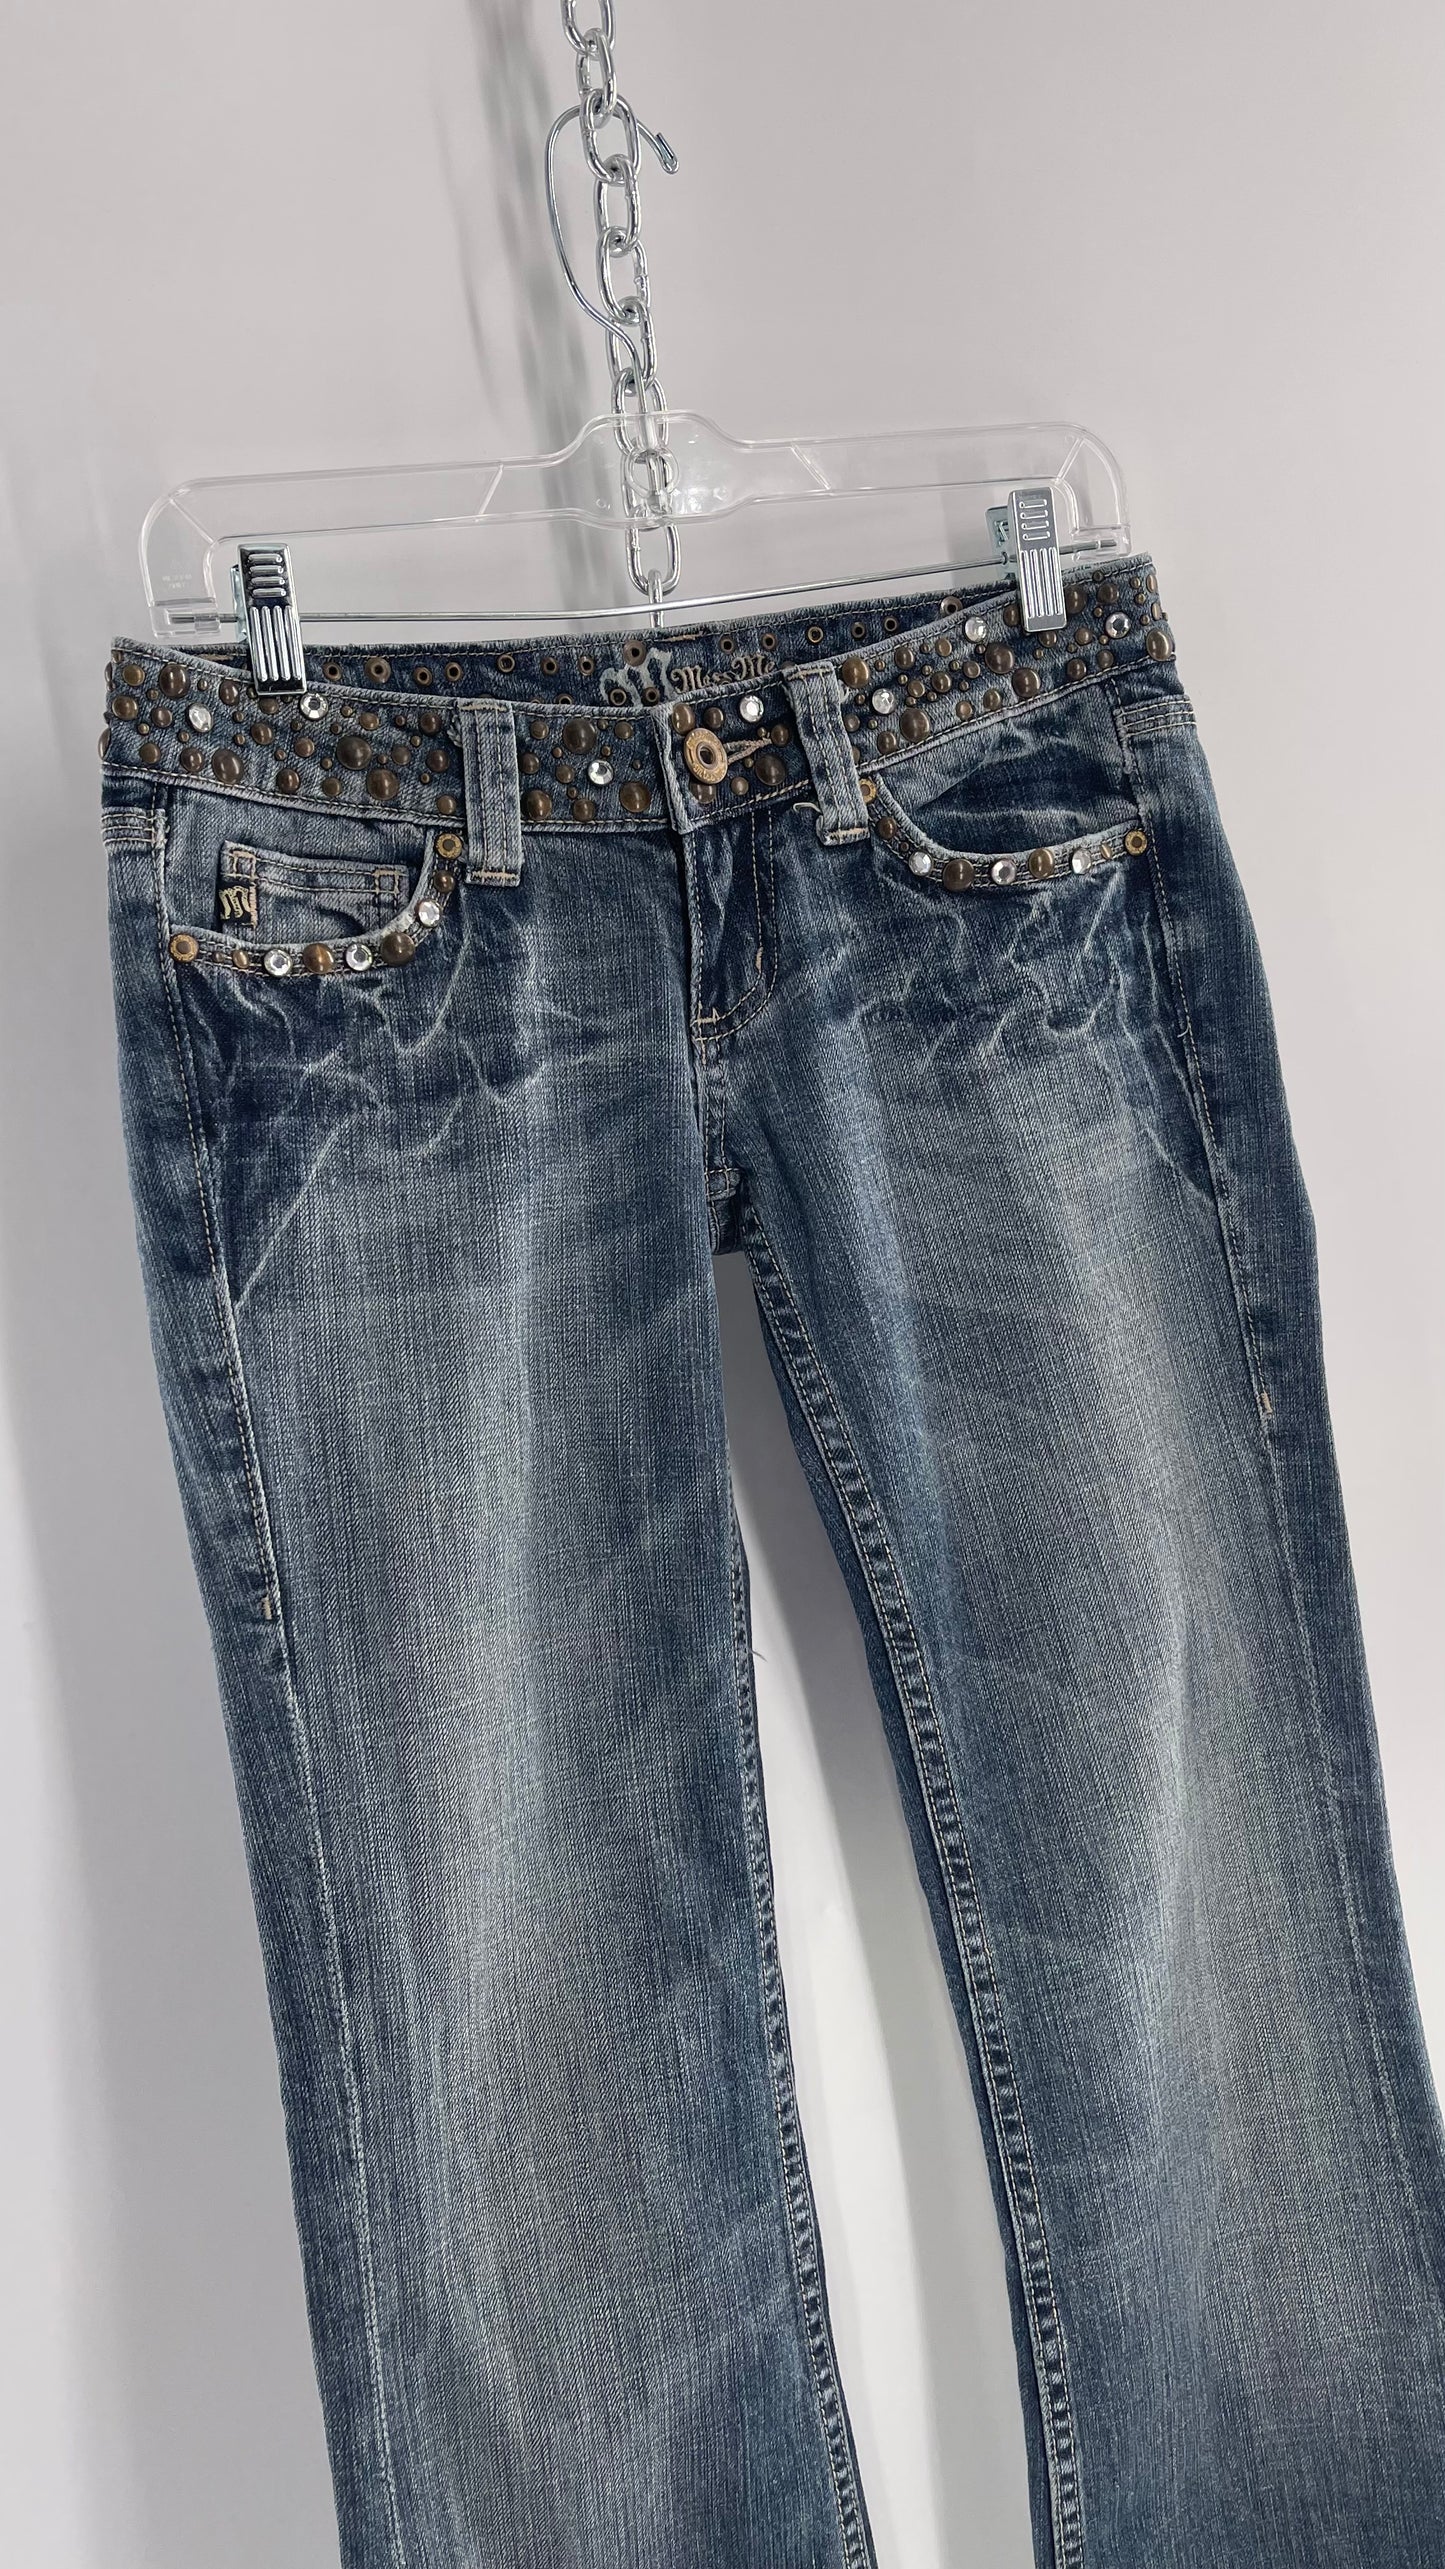 Vintage Miss Me Grainy Stone Wash Kick Flares with Studded Low Waist and Back Pockets (26)